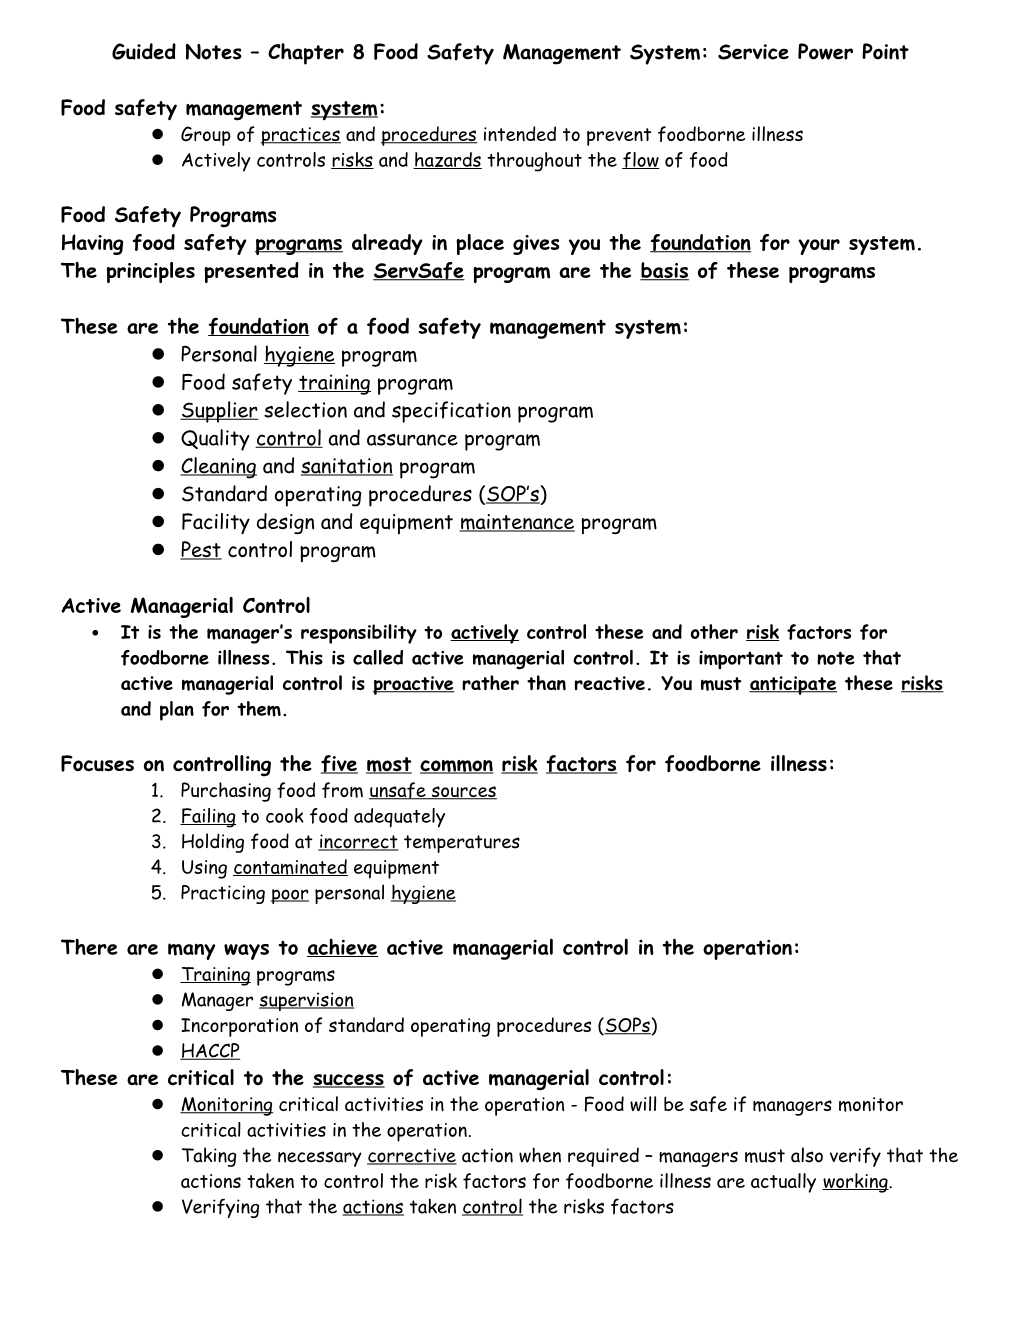 Guided Notes Chapter 5 the Flow of Food, Purchasing, Receiving and Storage Power Point